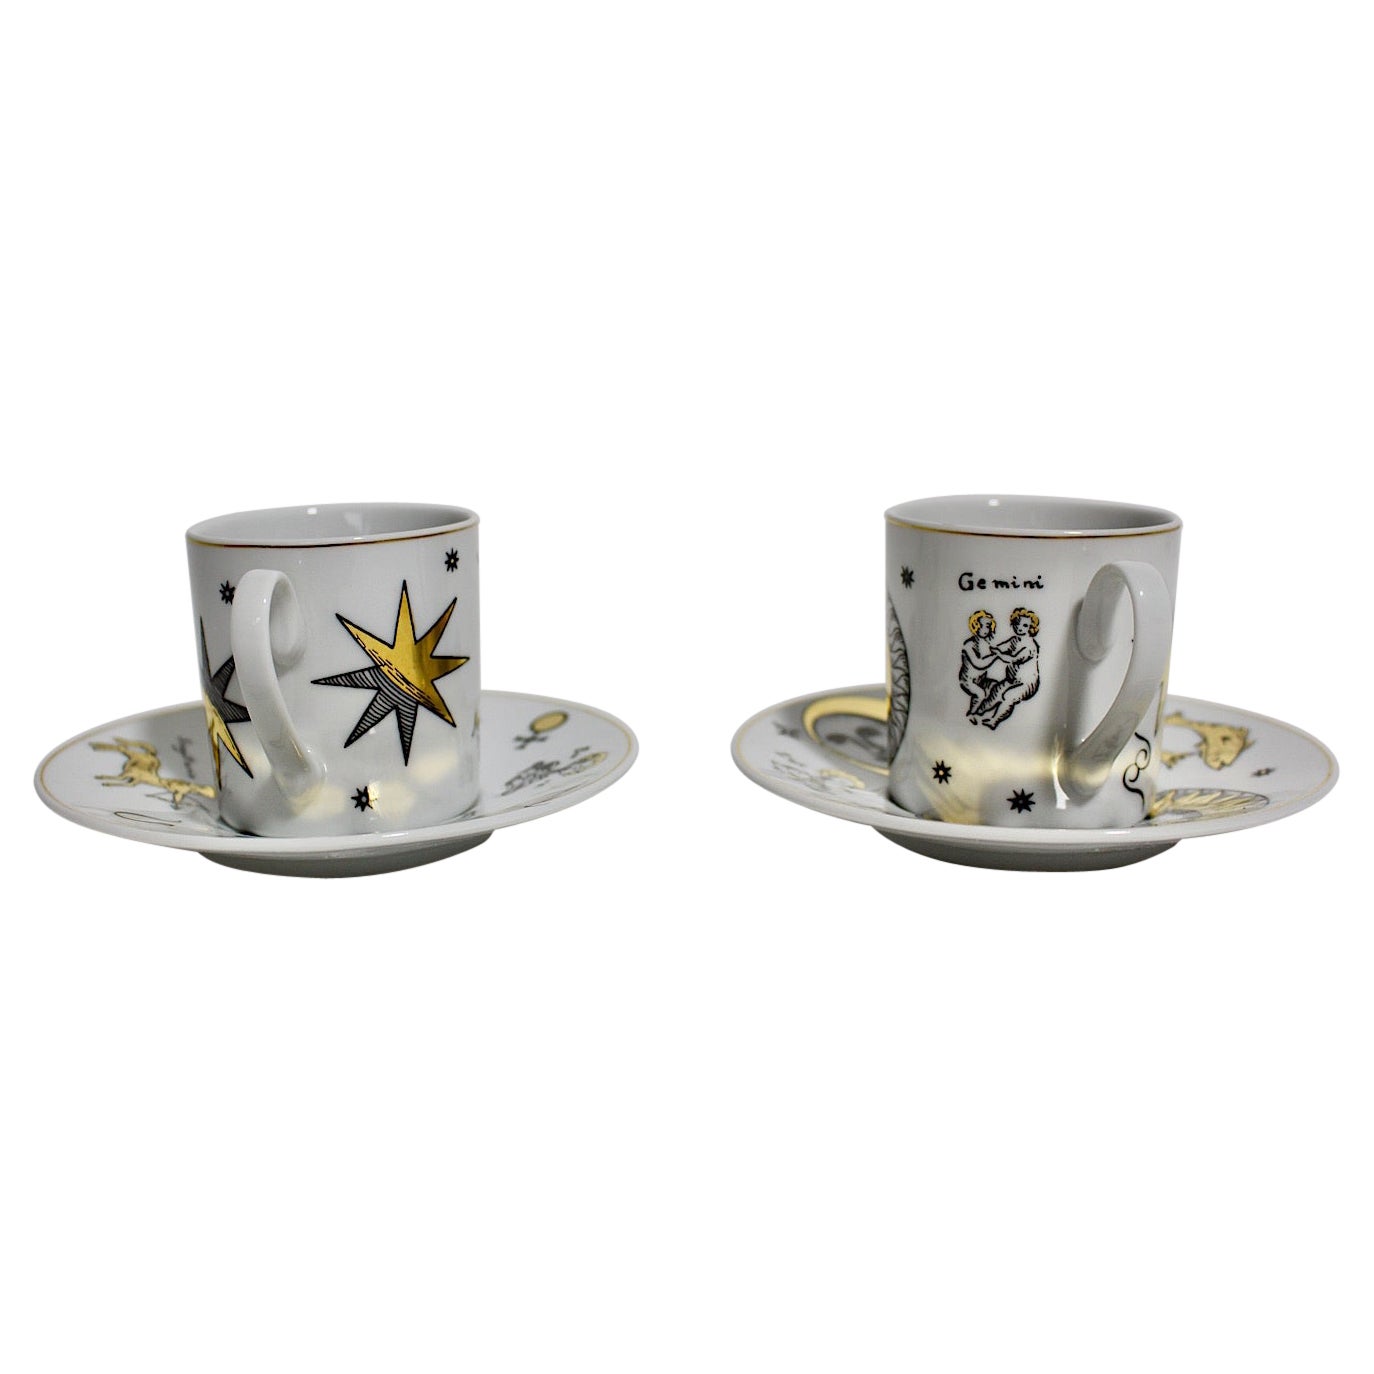 Modern Vintage Duo Set of Espresso Cups Piero Fornasetti for Rosenthal 1980s